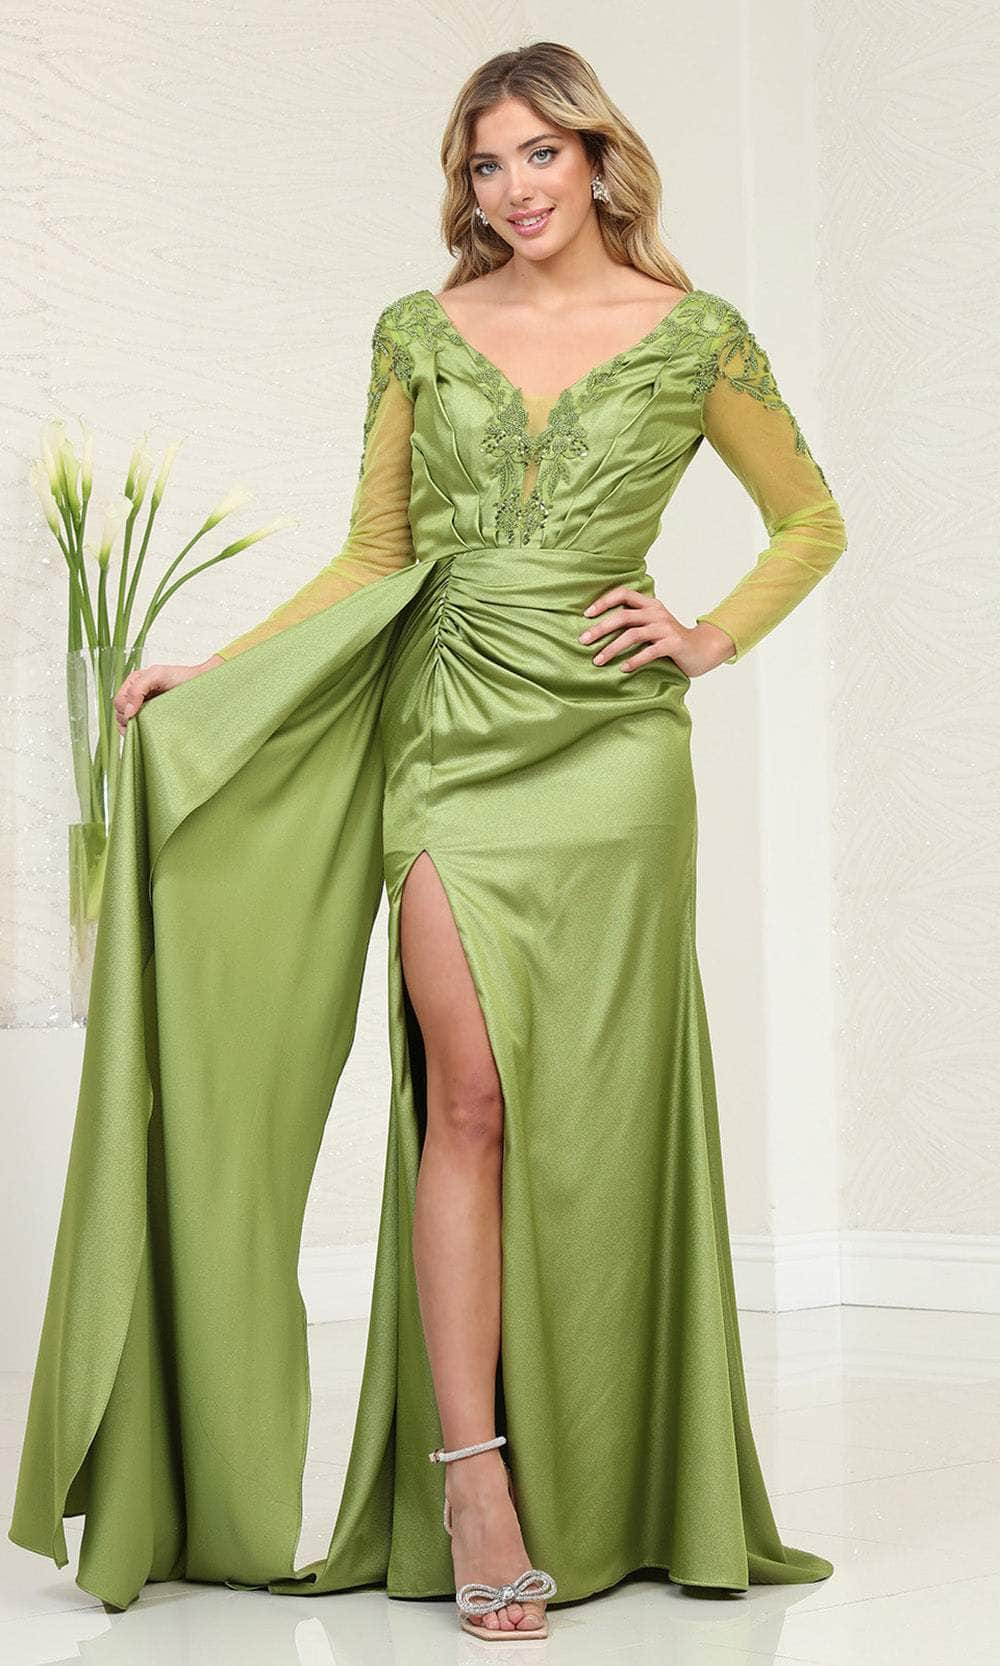 May Queen RQ8045 - Sheer Long Sleeve Ruched Prom Gown Prom Dresses 6 / Olive